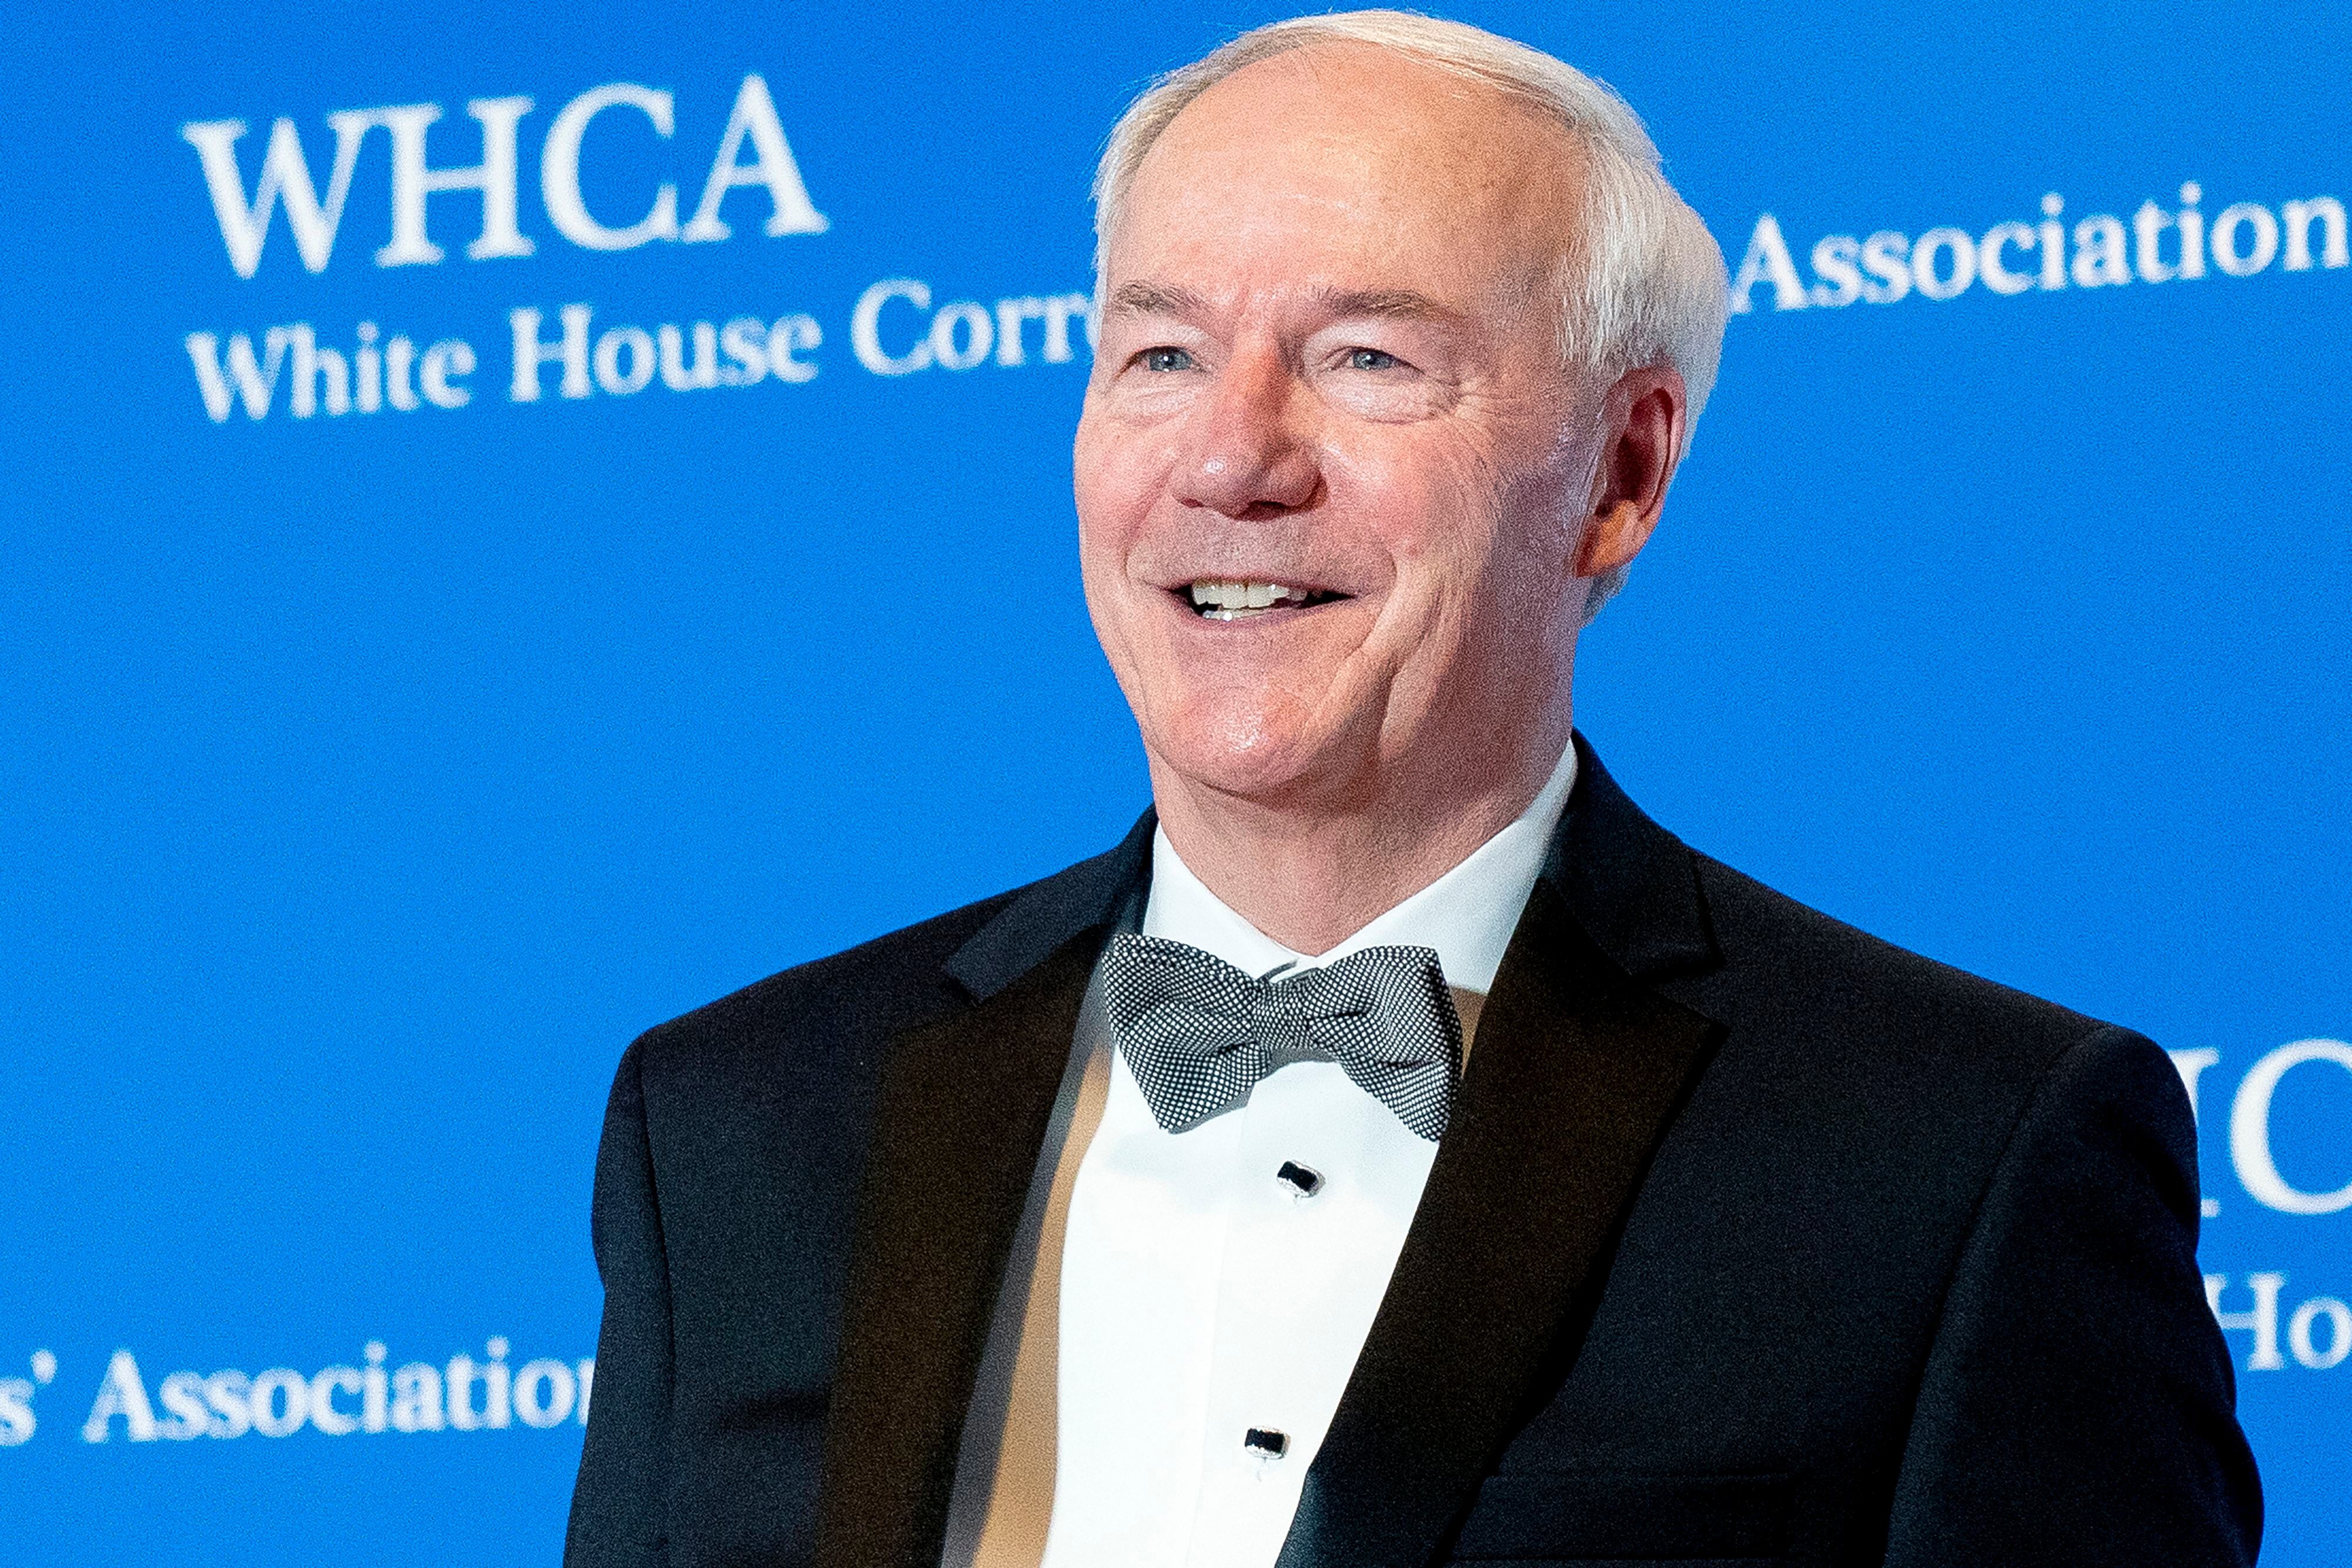 Former Arkansas Governor and presidential hopeful Asa Hutchinson arrives for the White House Correspondents Association Dinner at the Washington Hilton on April 29, 2023. (Photo by Stefani Reynolds/AFP)